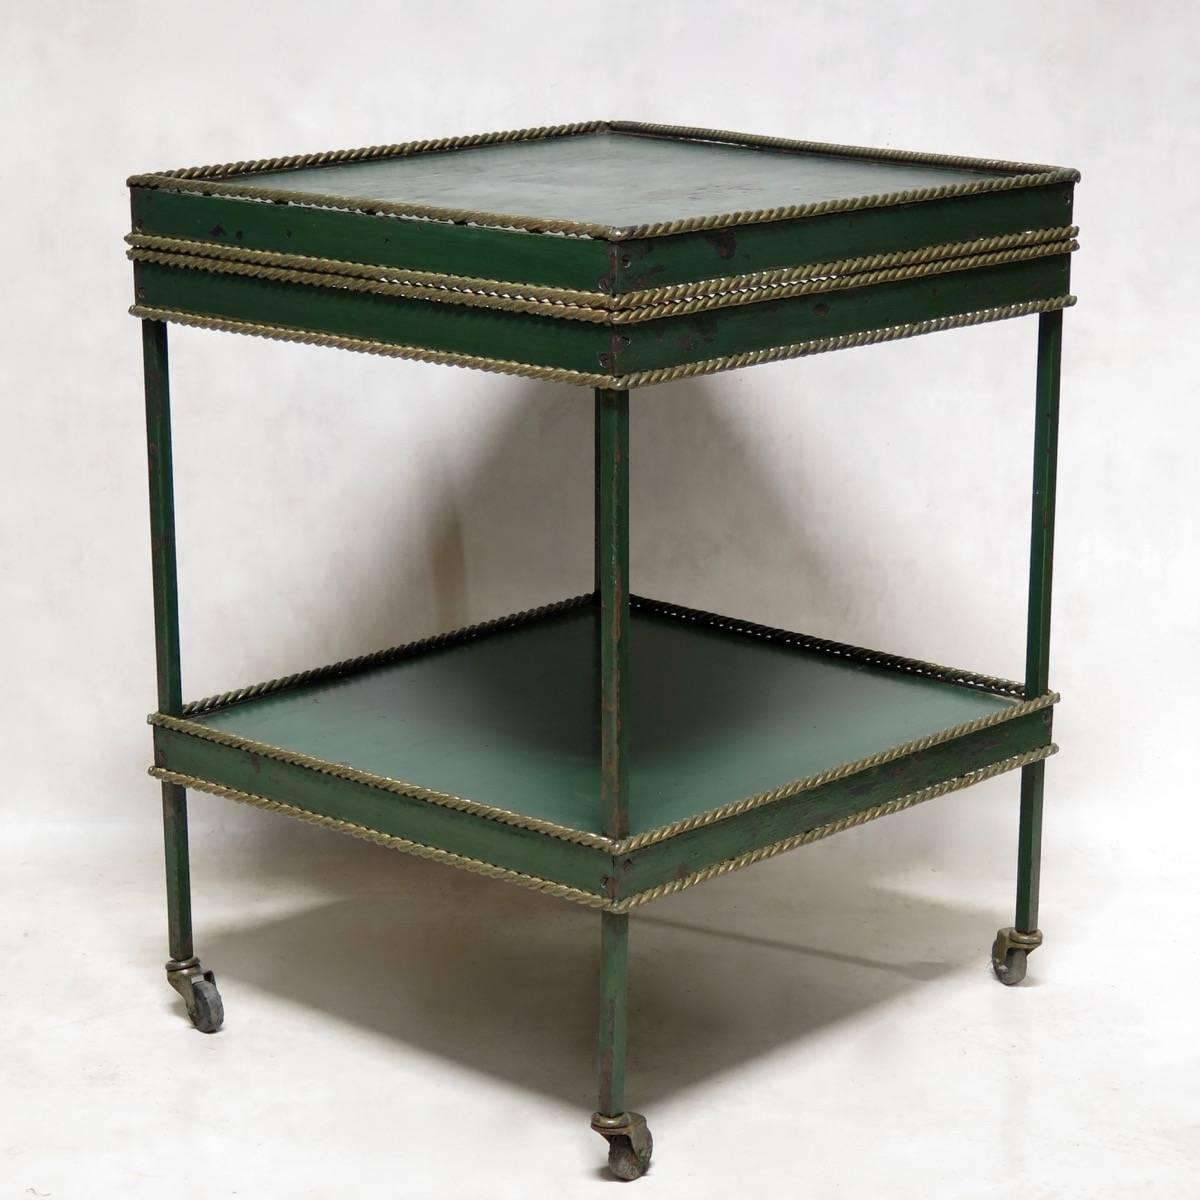 Unusual, two-tiered table made of iron tole, painted green, with a gilt, twisted rope surround.